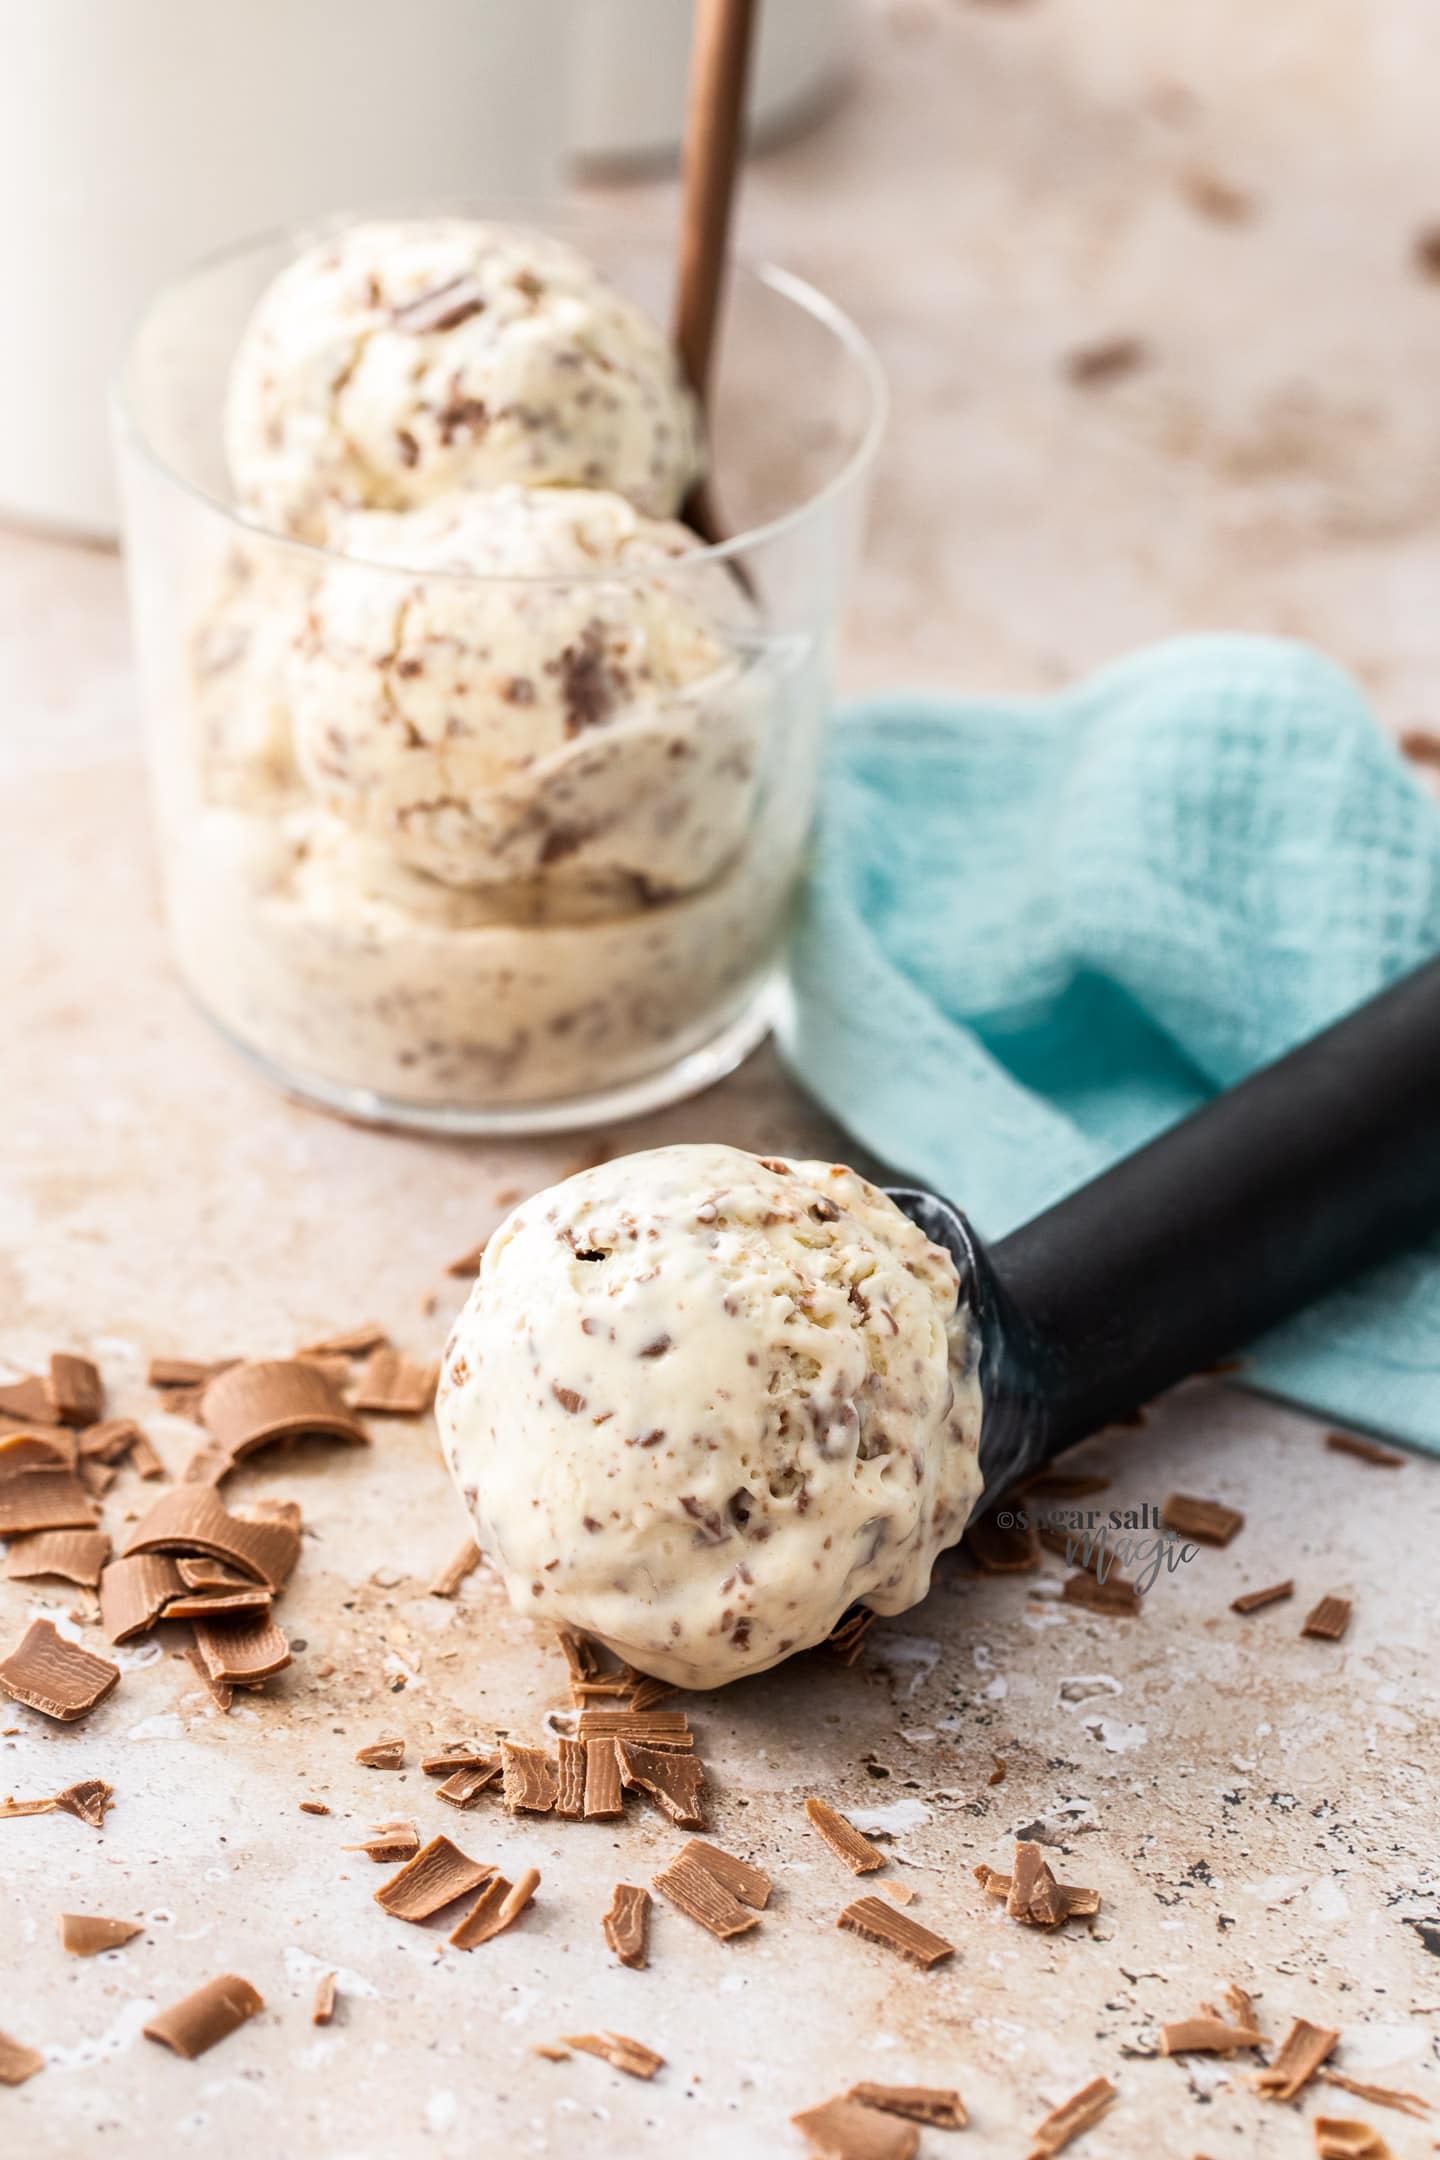 An ice cream scoop with a scoop of chocolate chip ice cream.